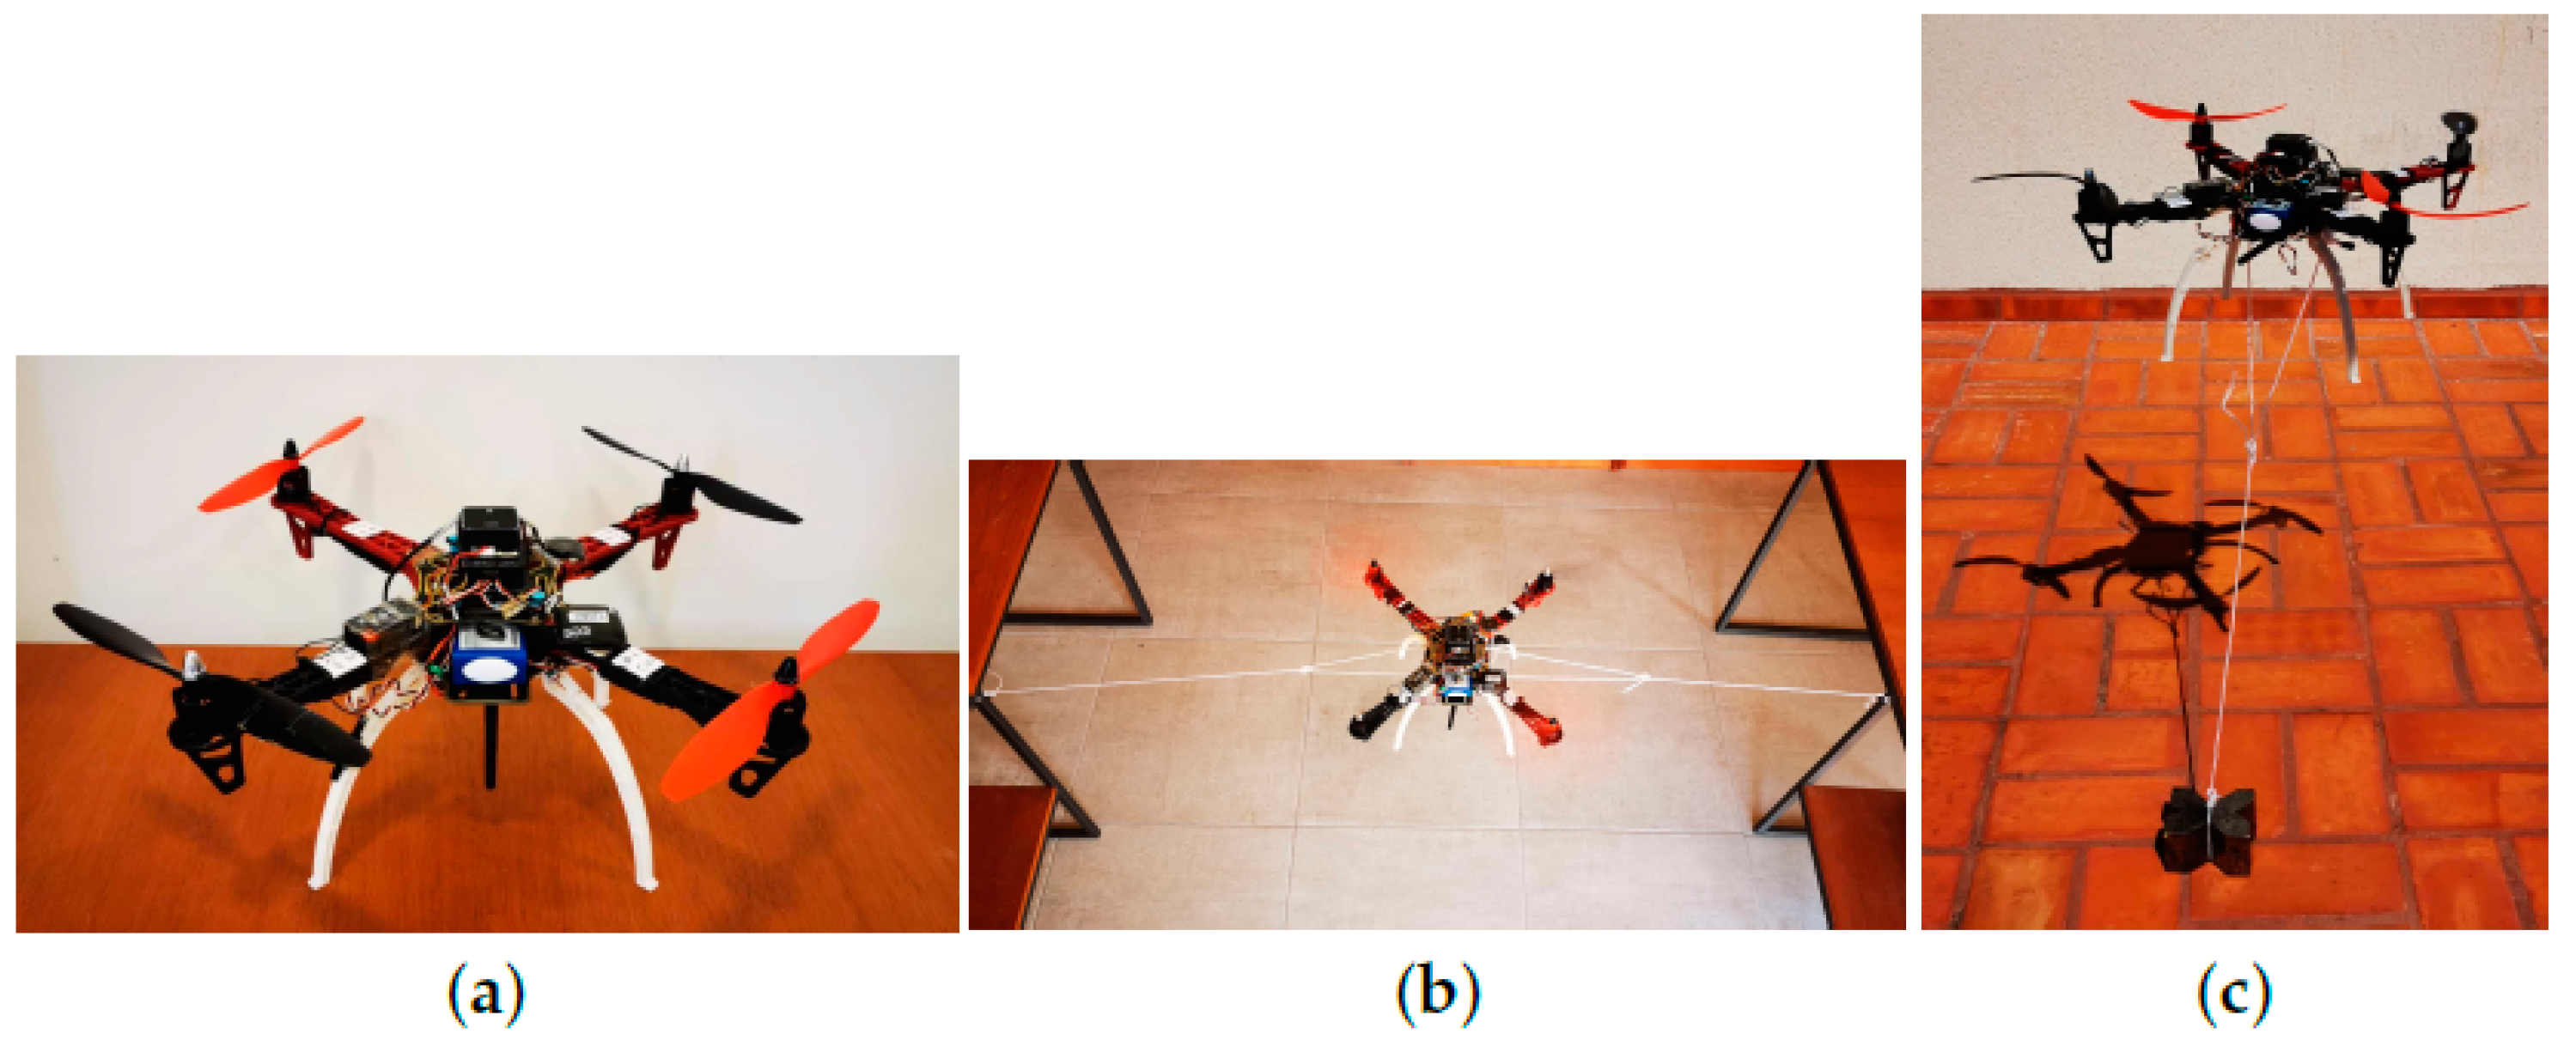 Aerospace | Free Full-Text | Pareto Optimal PID Tuning for Px4-Based  Unmanned Aerial Vehicles by Using a Multi-Objective Particle Swarm  Optimization Algorithm